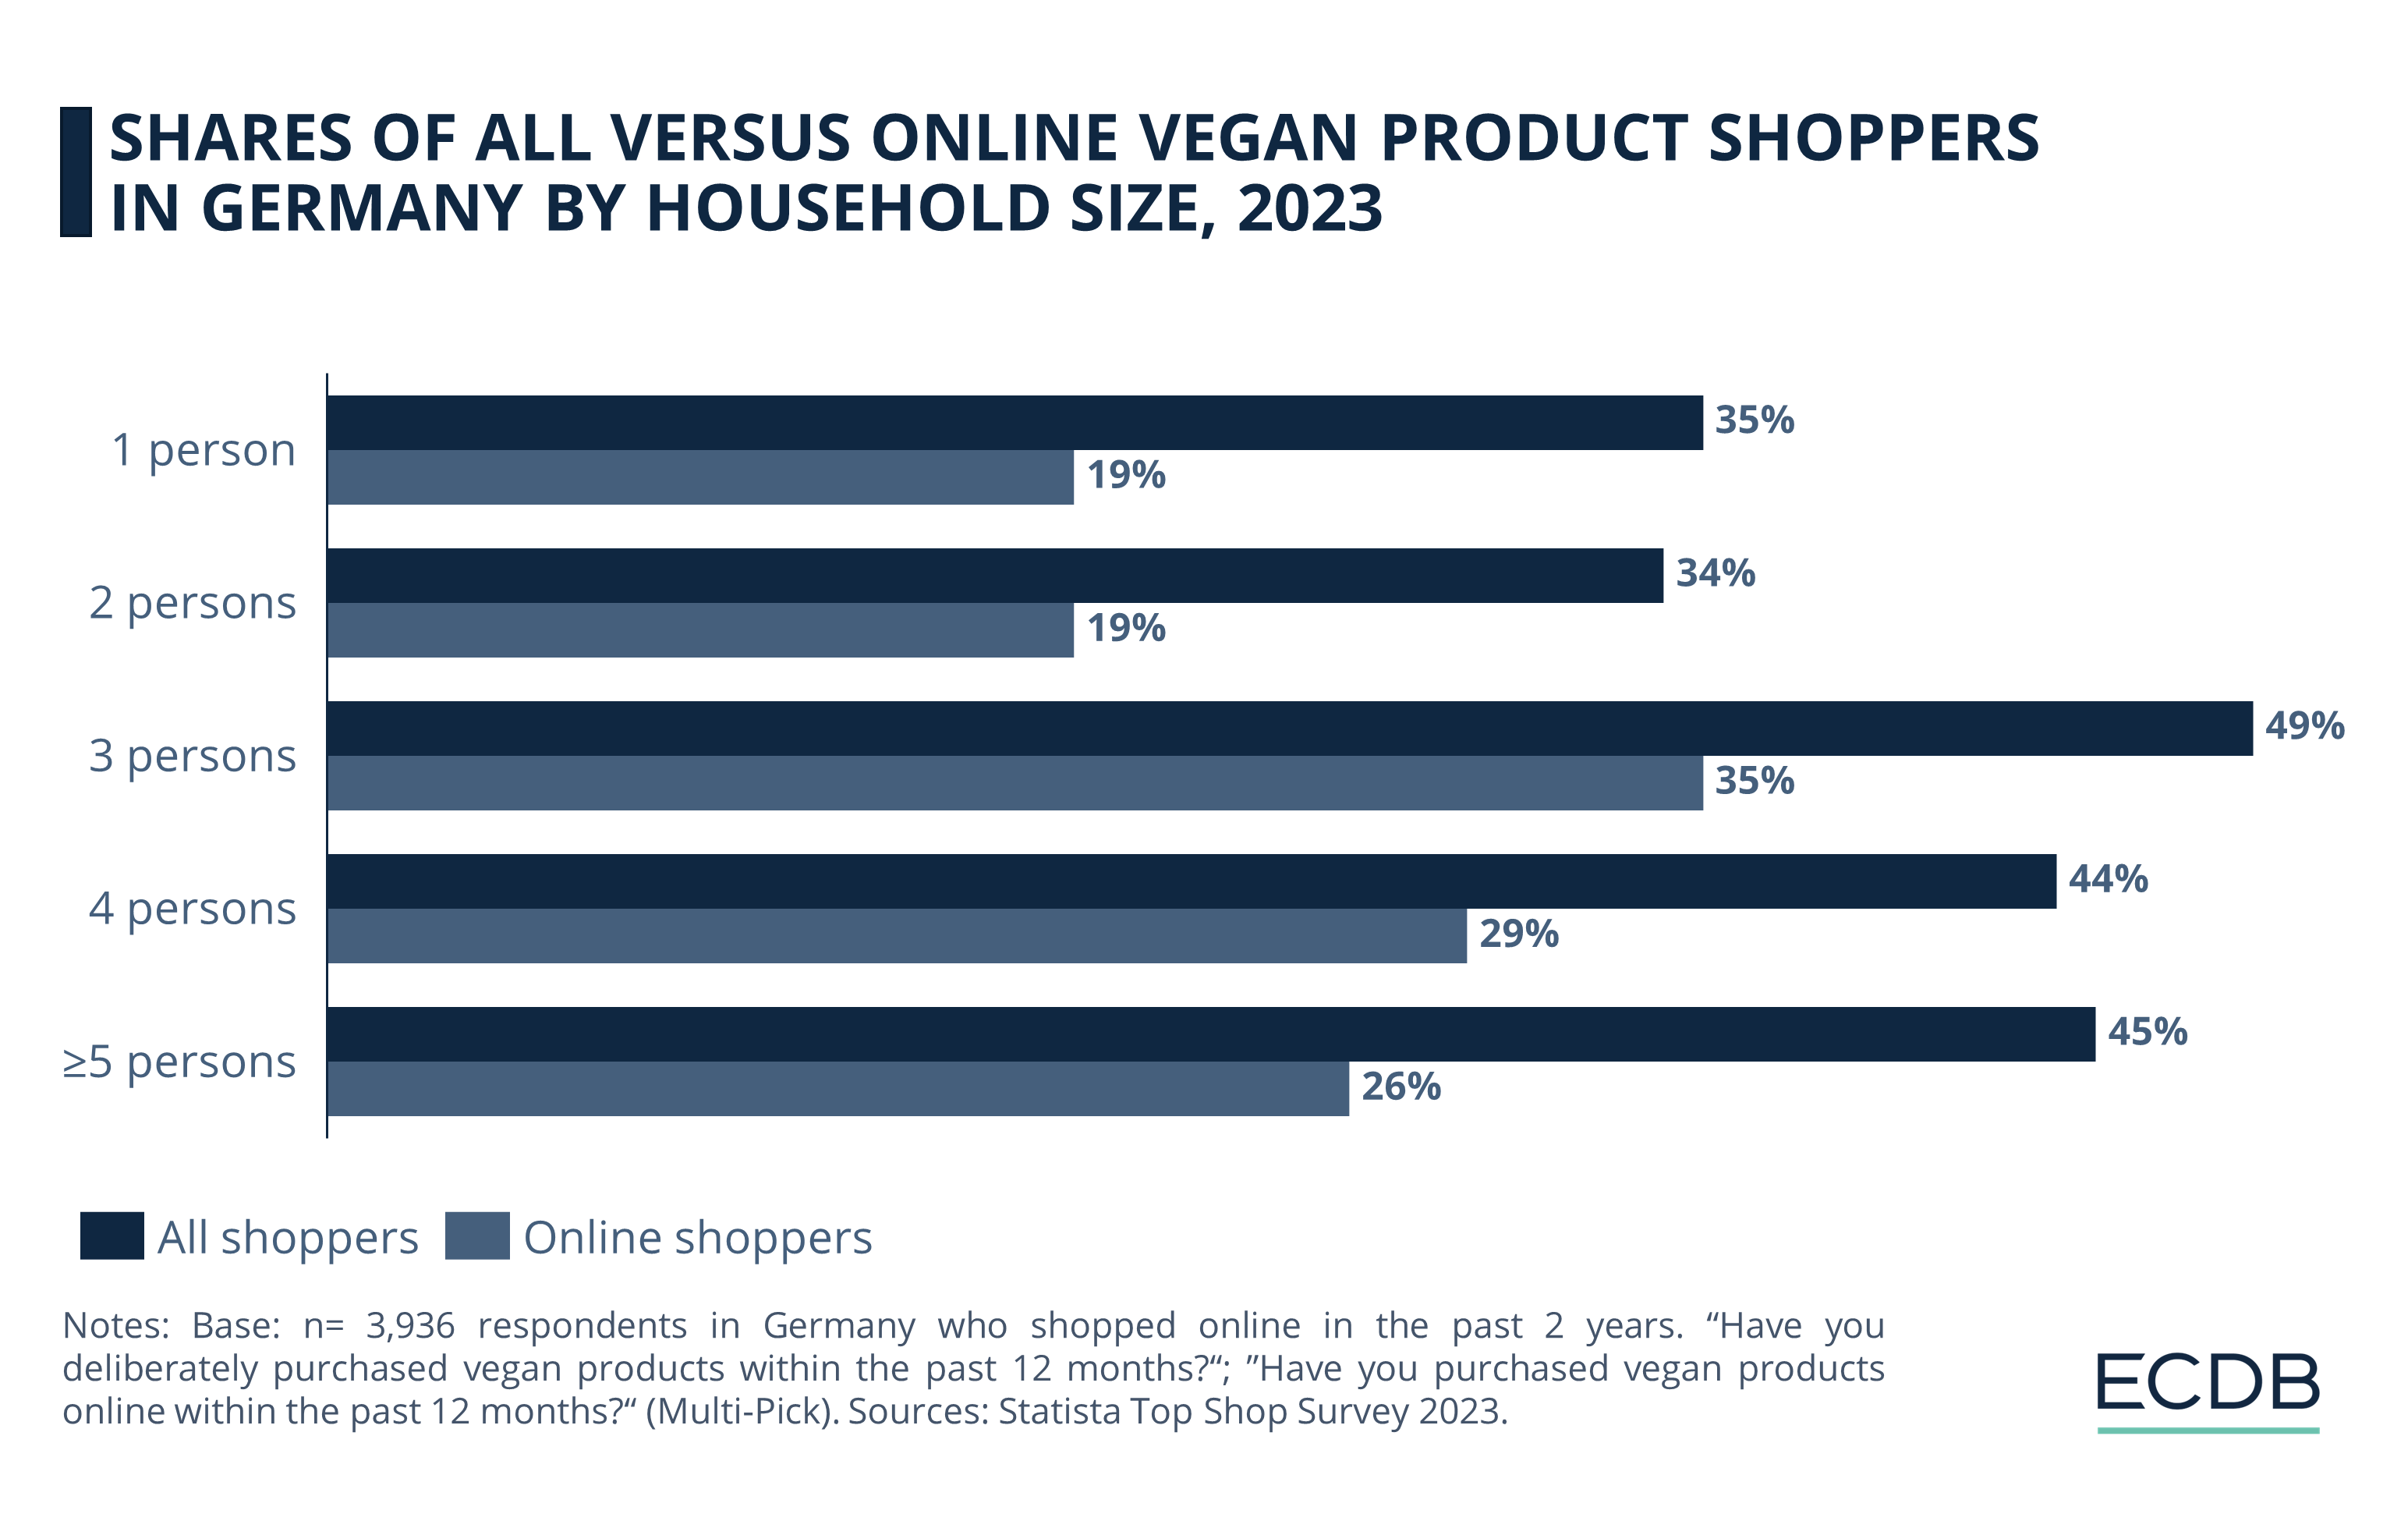 Shares of All Versus Online Vegan Product Shoppers in Germany by Household Size, 2023